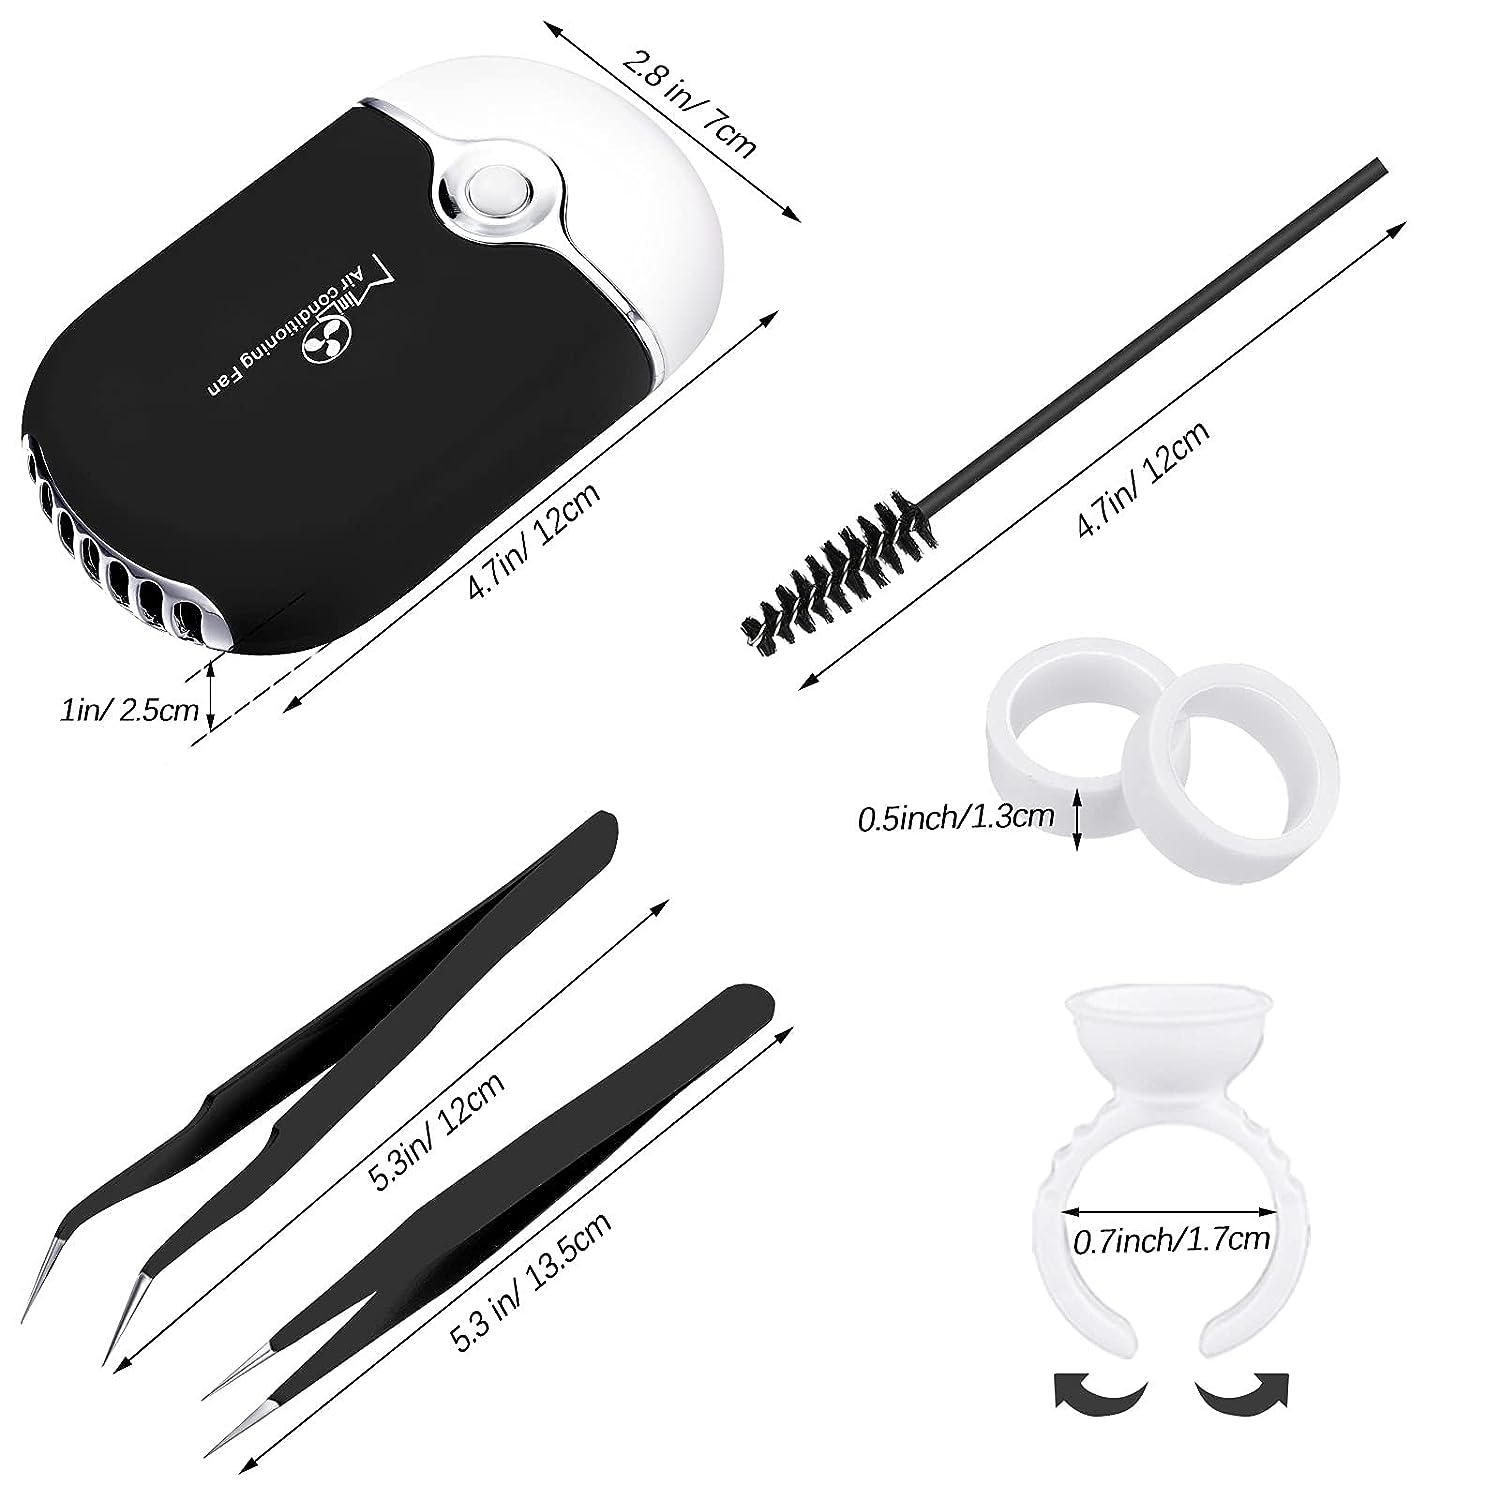 Honoson Eyelash Extension Supplies, USB Air Conditioning Blower, 2 Straight  and Curved Tweezers,100 Disposable Mascara, 50 Glue Ring Holder, 2 Tapes